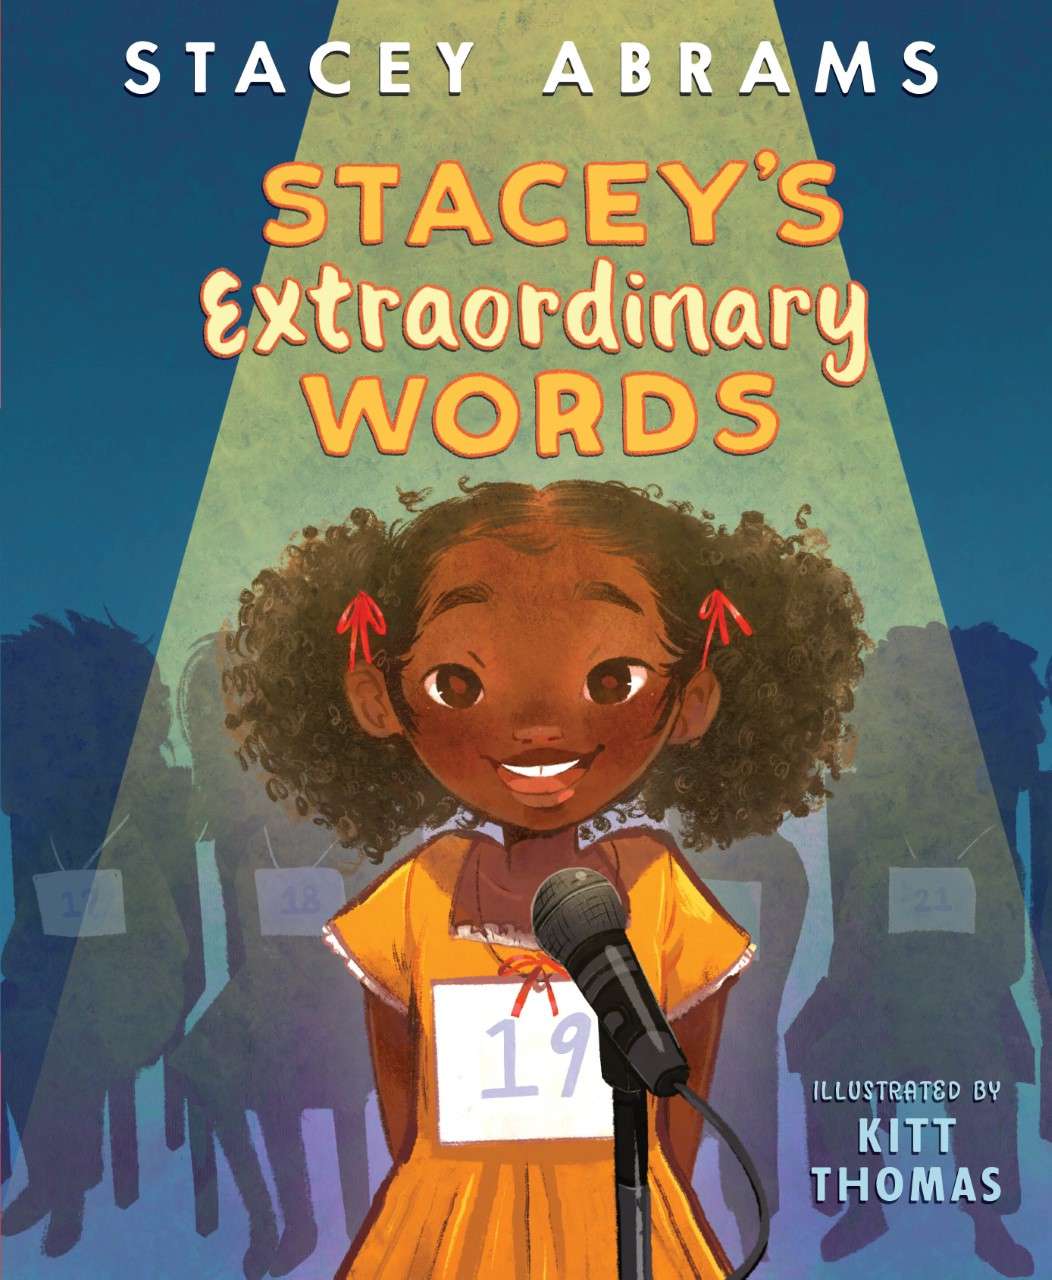 stacey's extradinary words book